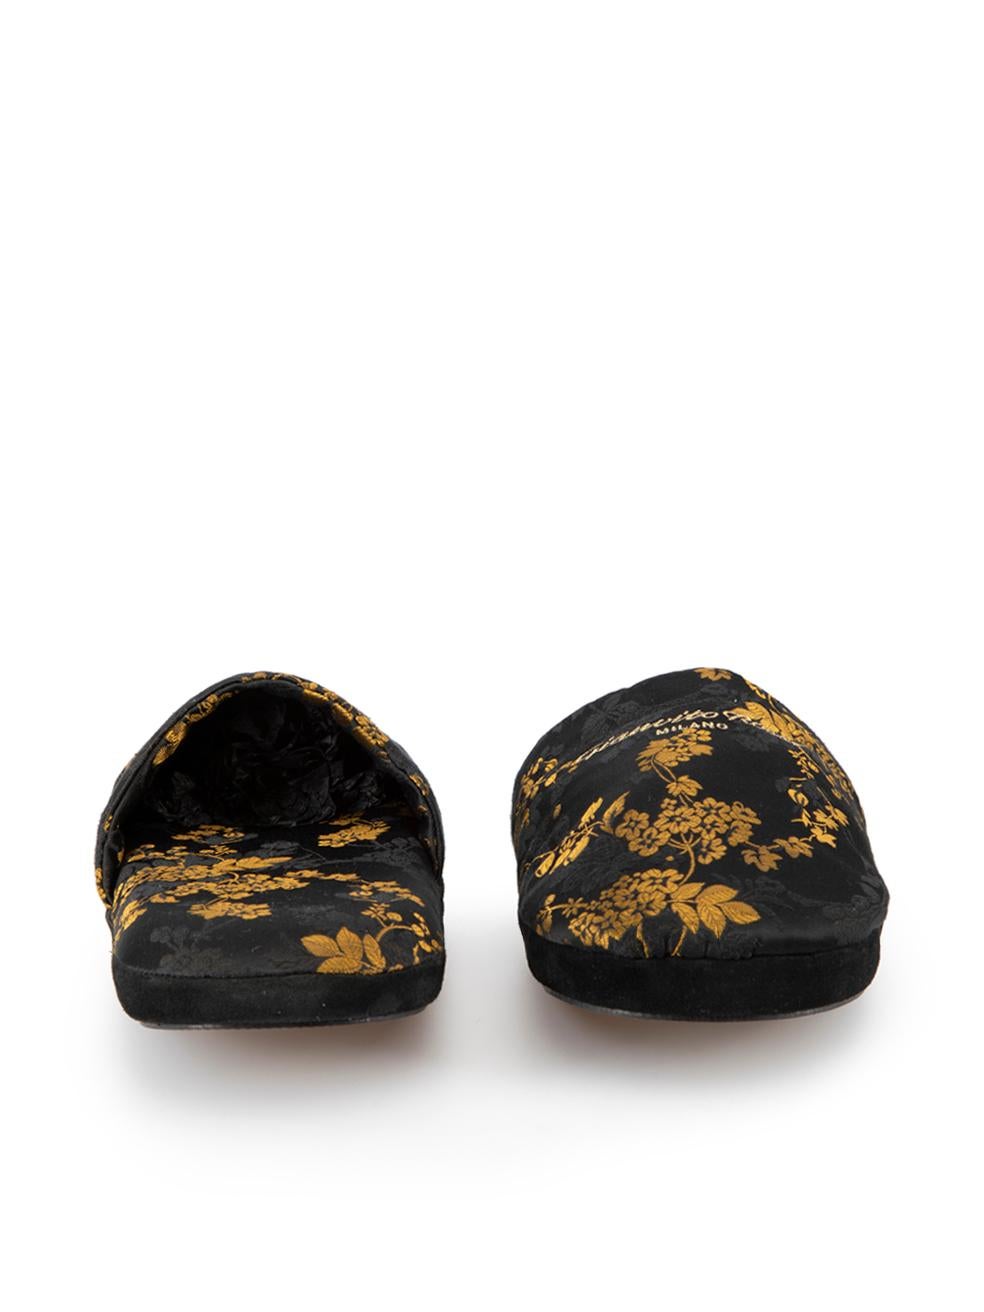 Gianvito Rossi Women's Black Floral Pattern Slides In Good Condition For Sale In London, GB